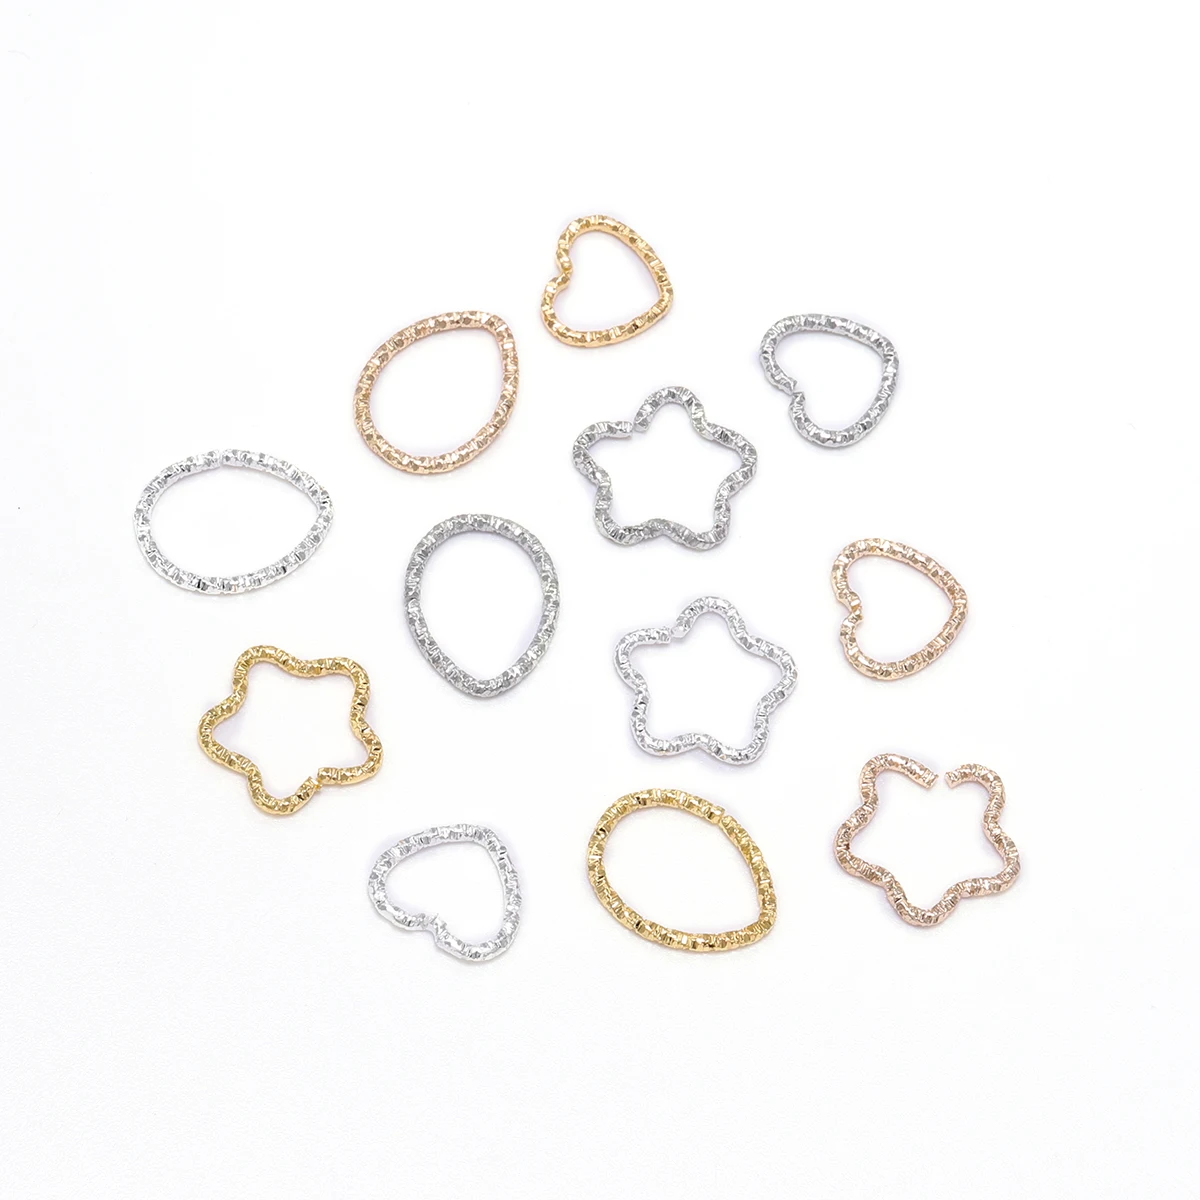 50pcs/lot 16.5mm New Style Silver Gold star Jump Rings Twisted Split Rings Spacer Connectors For Jewelry Making Making Supplies